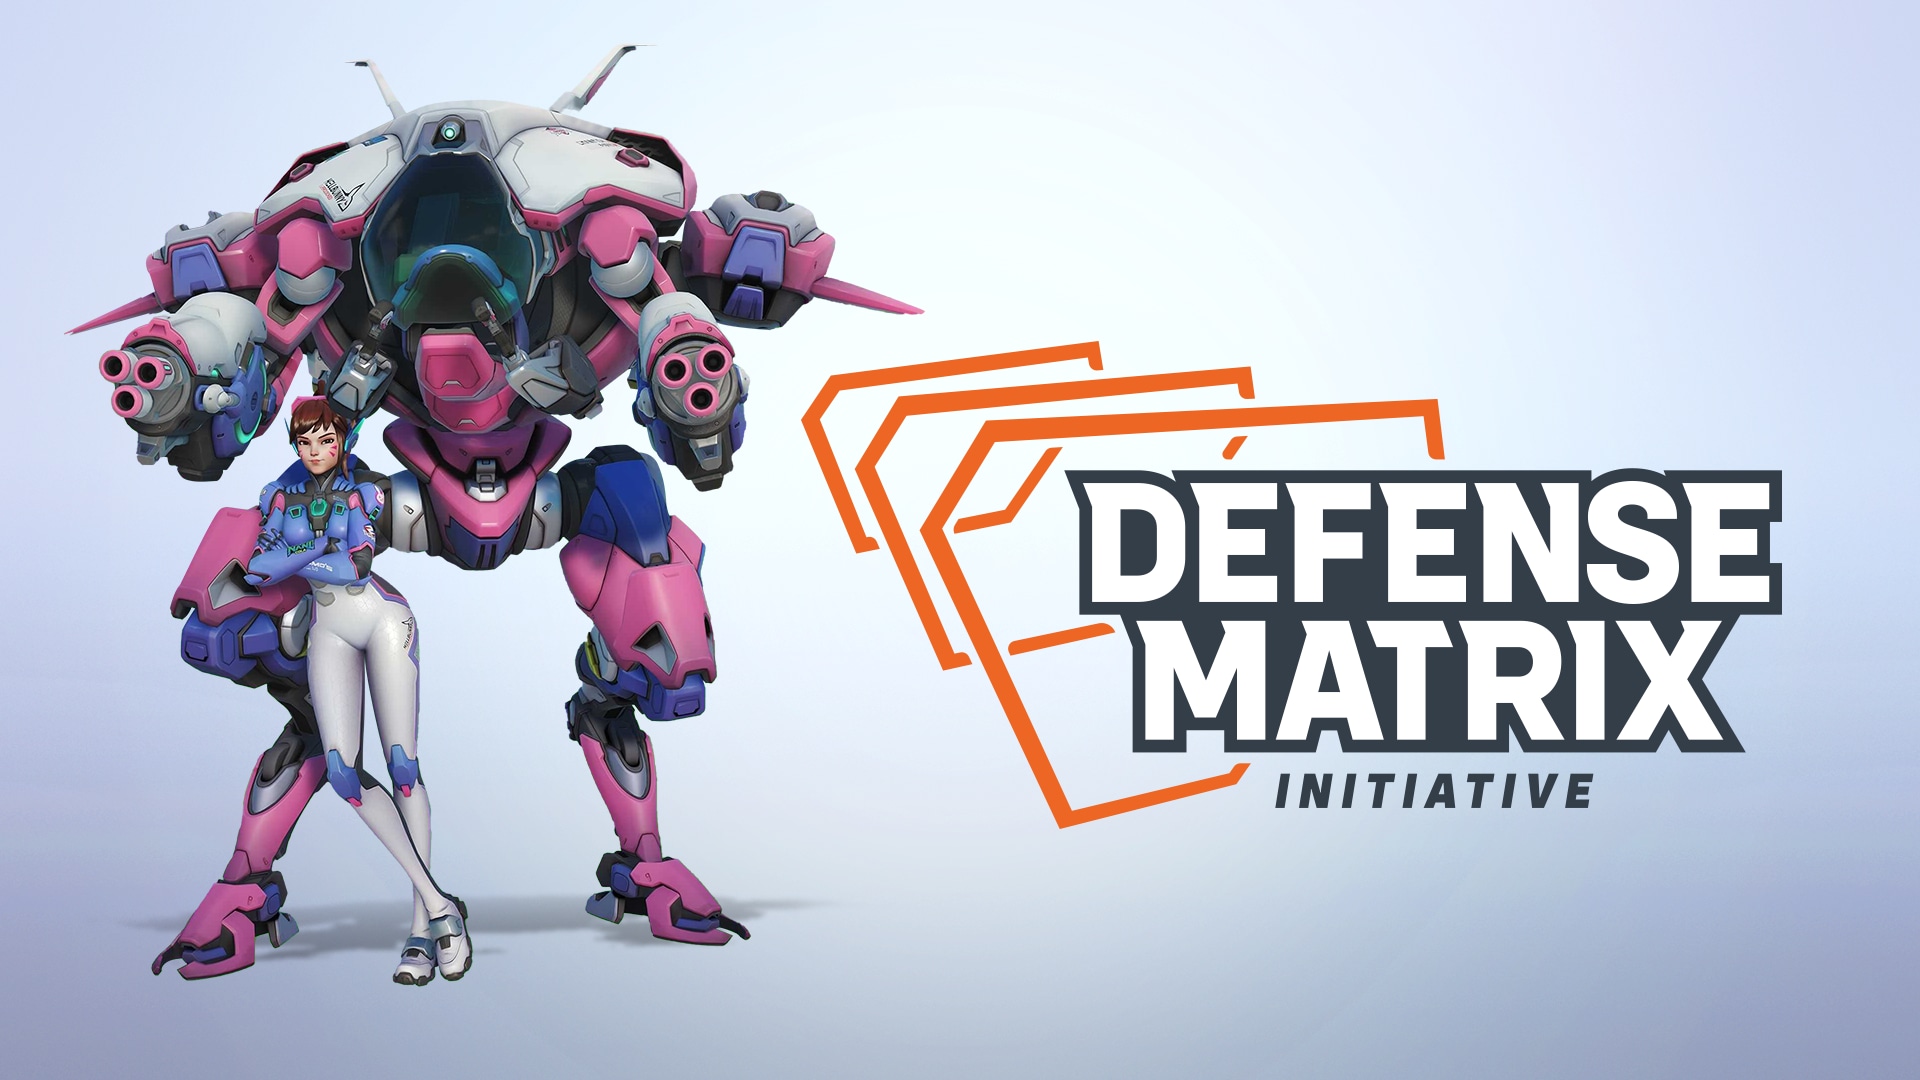 Defense Matrix activated! Fortifying gameplay integrity and positivity in Overwatch 2:23857517